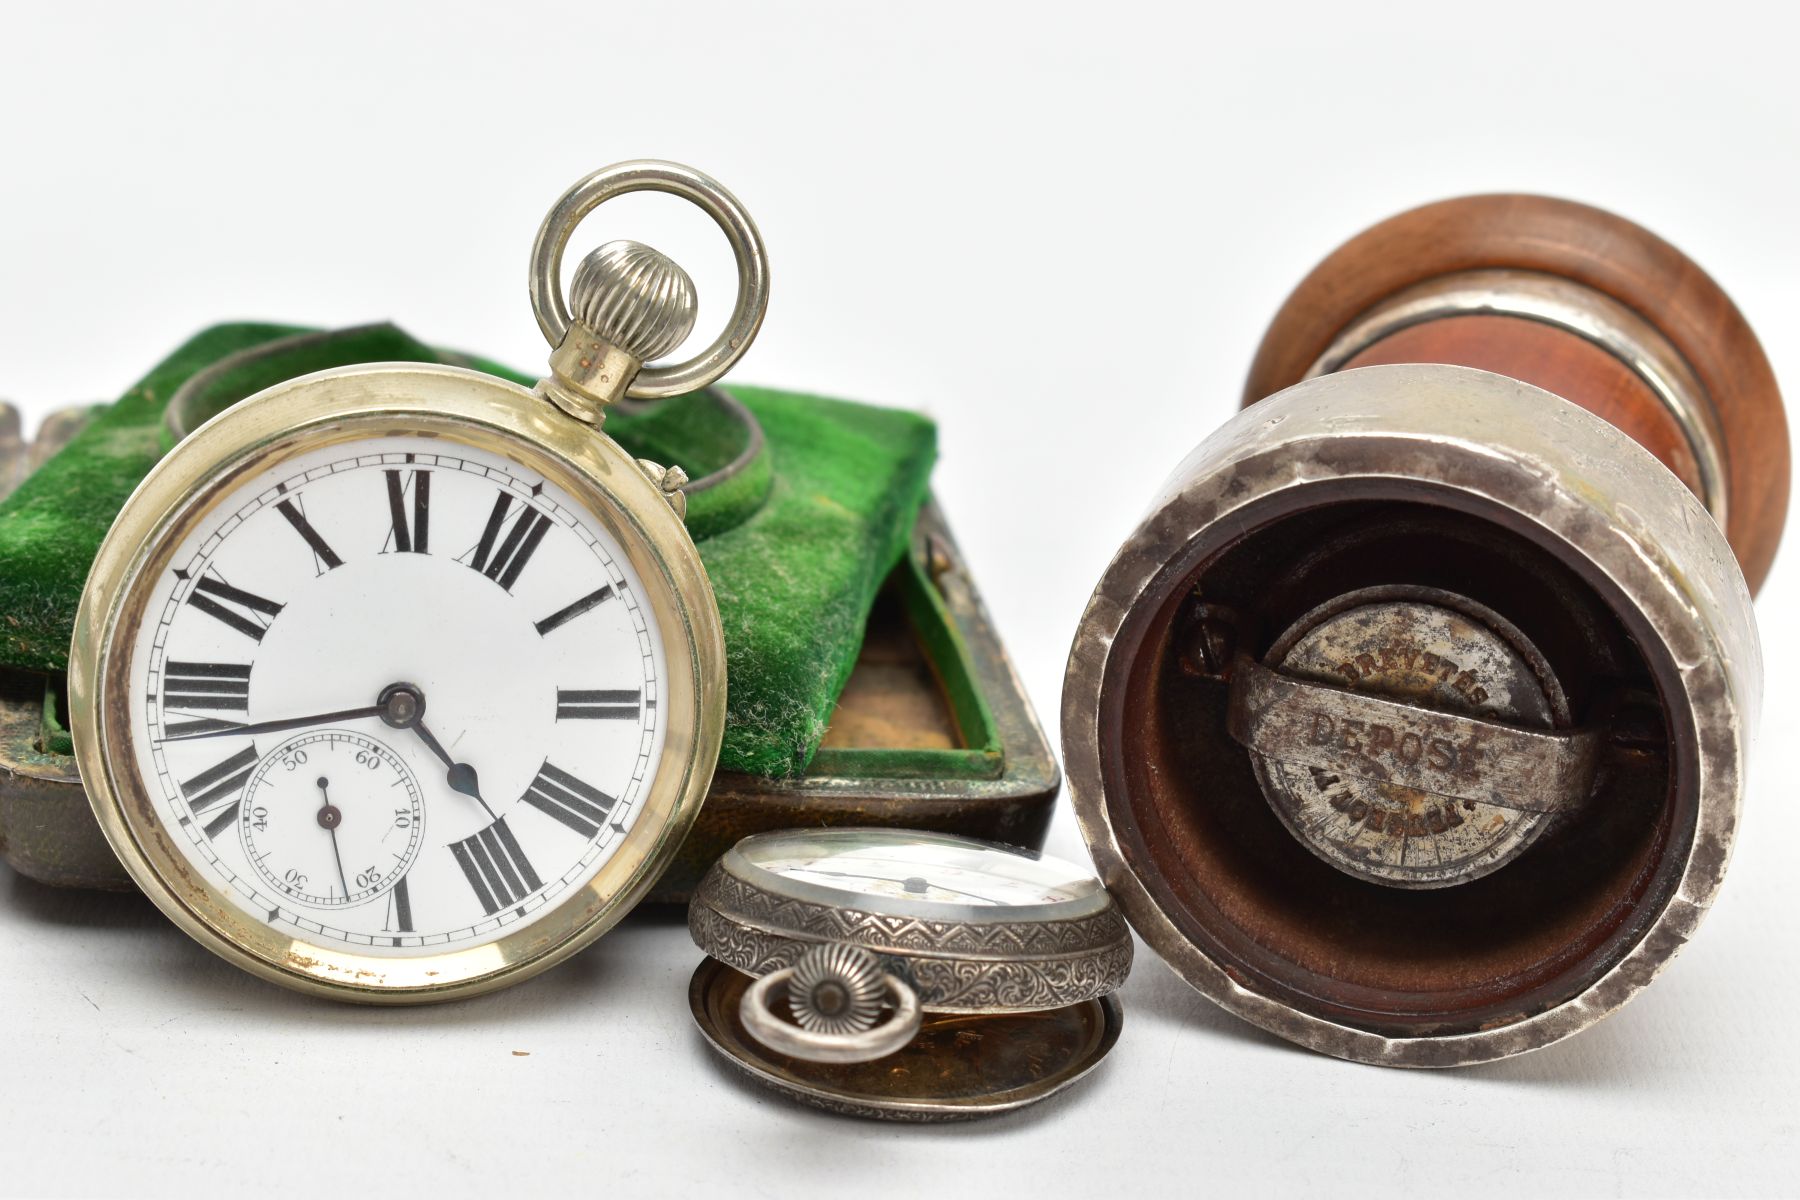 AN OPEN FACE POCKET WATCH WITH CASE, A LADIES SILVER POCKET WATCH AND A SALT MILL, a white metal - Image 7 of 7